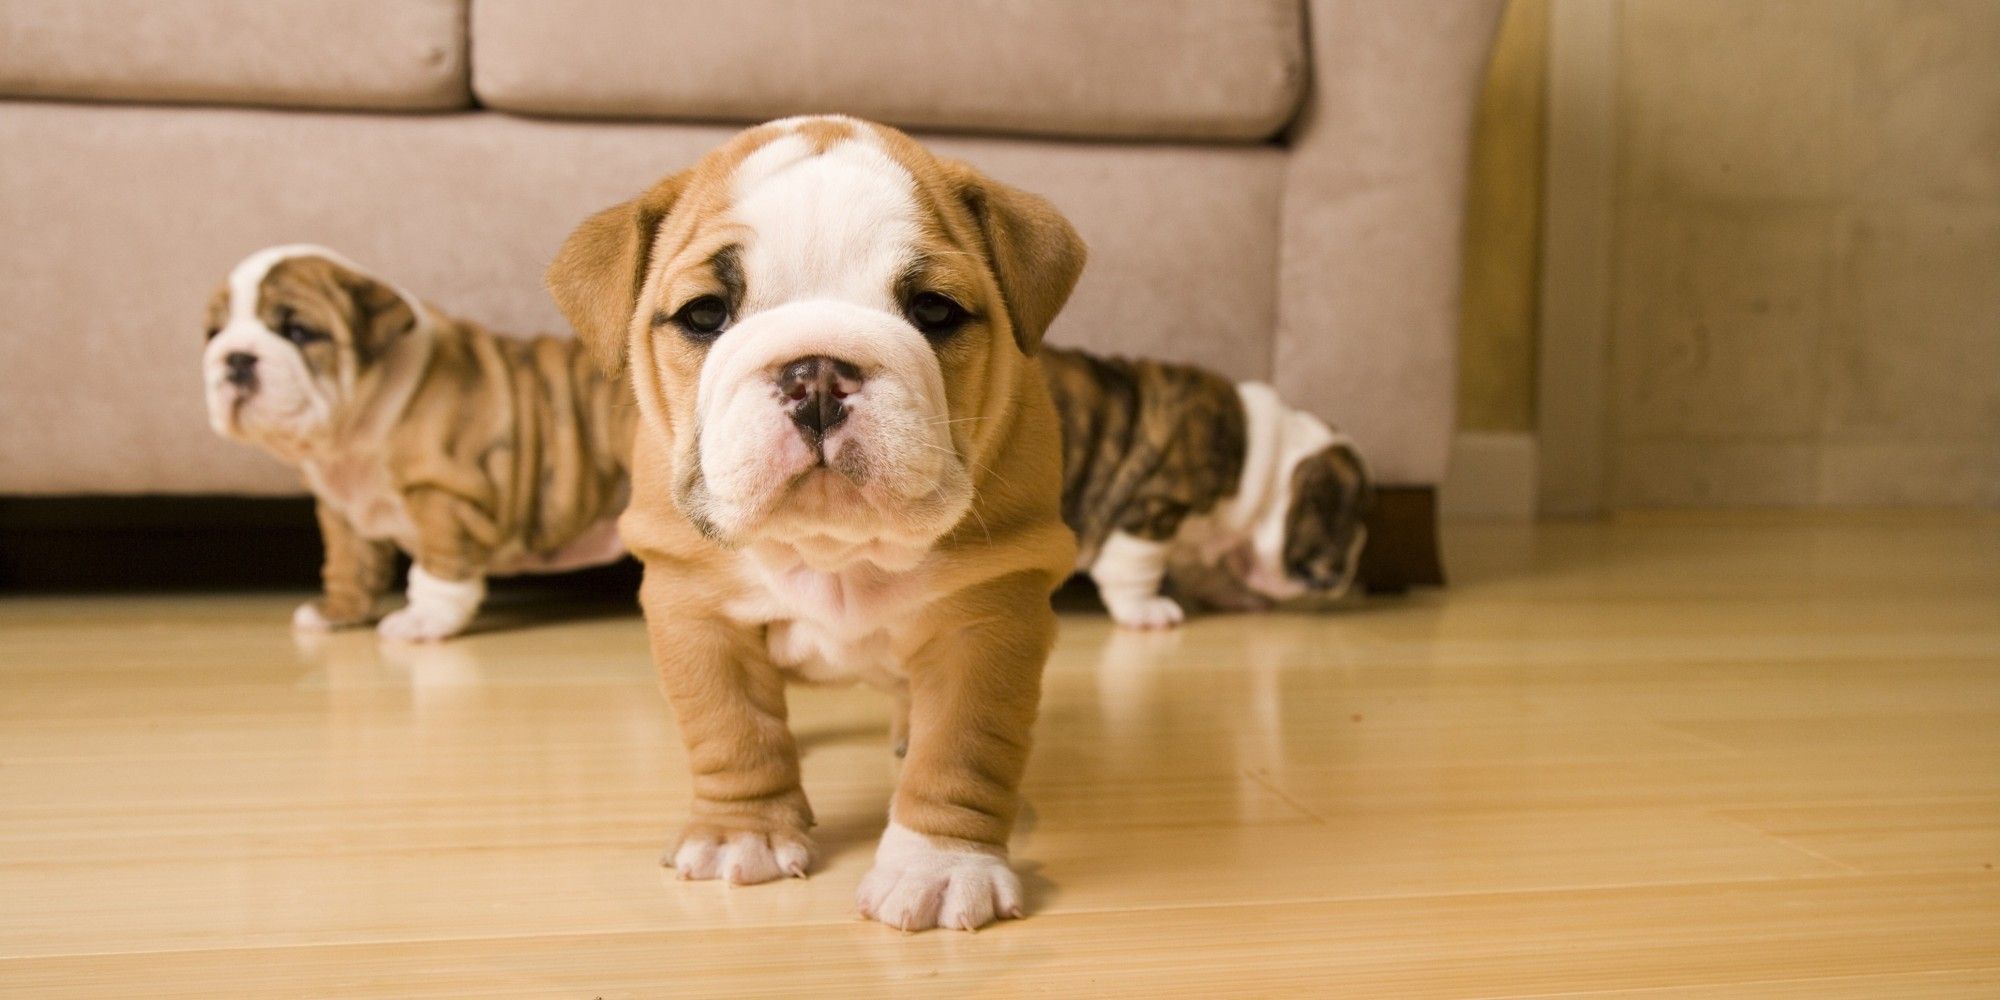 English Bulldog Puppy Barks For The First Time And Has Wallpaper